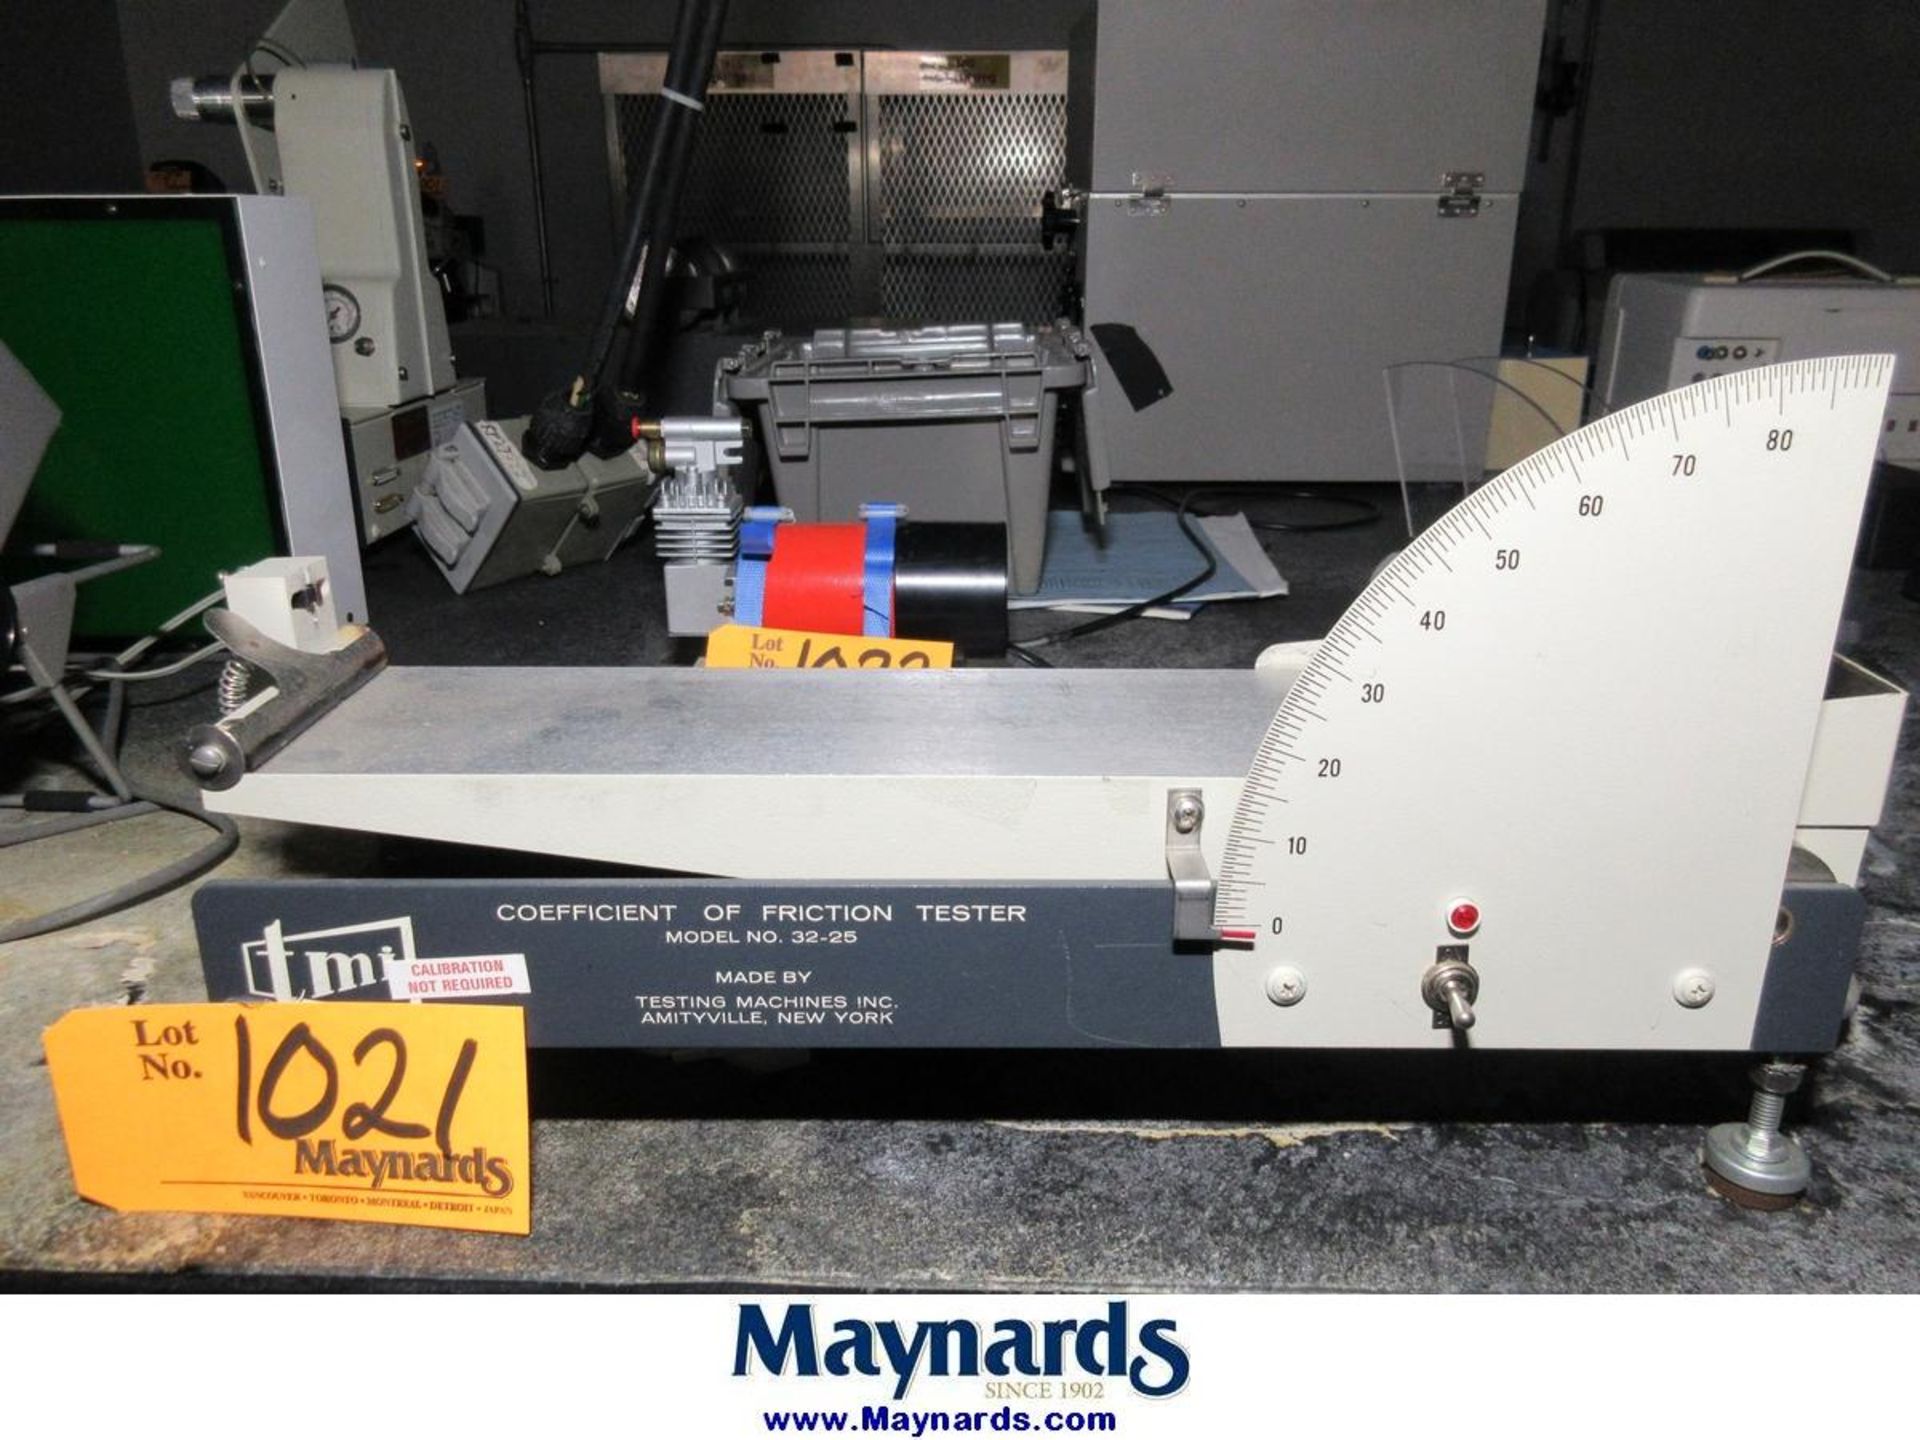 Testing Machines Inc 32-25-00-0001 Coefficient of Friction Tester - Image 2 of 6